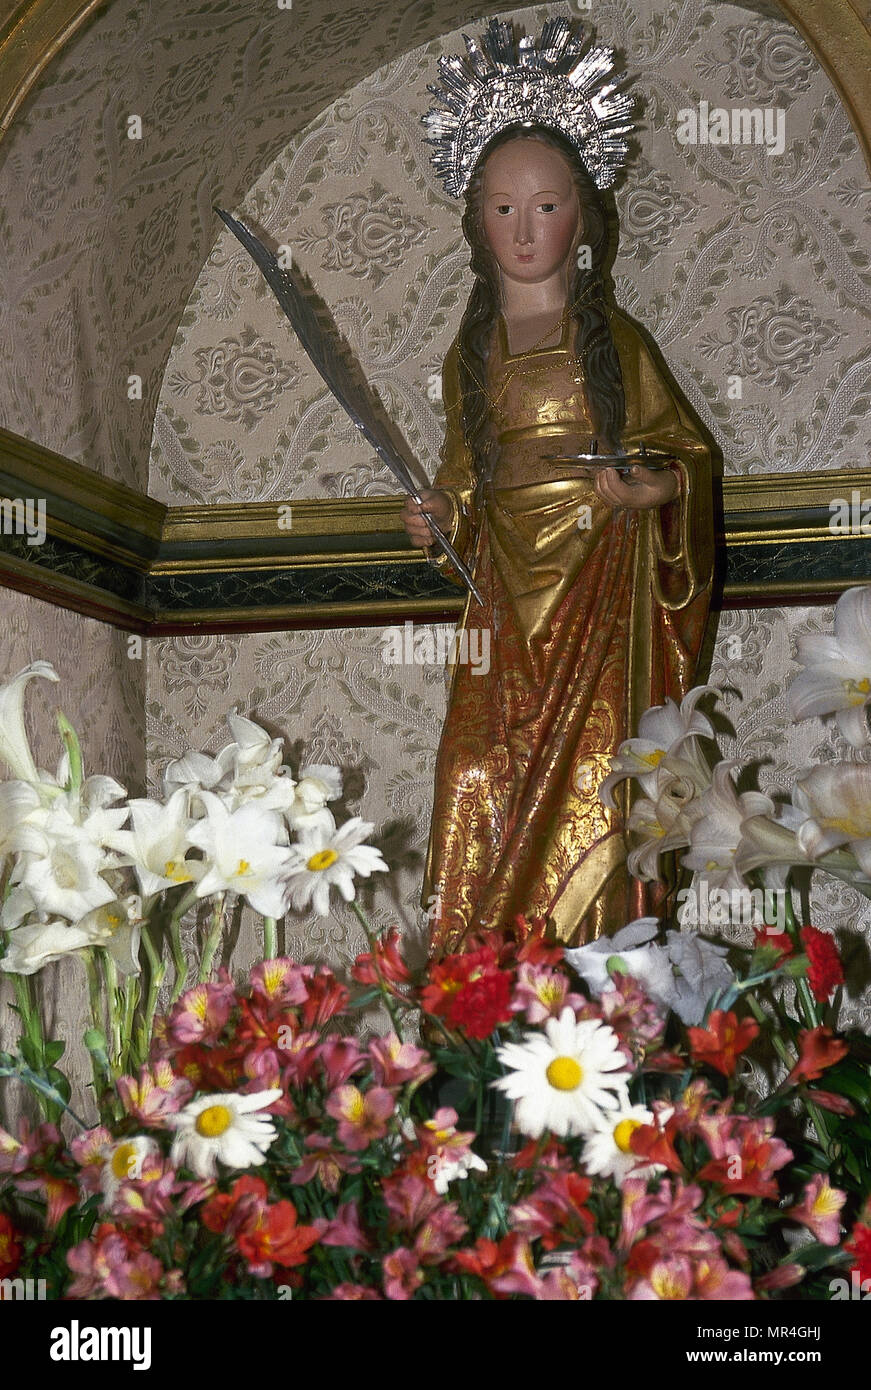 Saint Lucy (c. 283-304). Christian martyr who died during the Diocletianic Persecution. Polychrome wood carving, height: 82 cm. Hermitage of St. Lucy. Puntallana, La Palma, province of Santa Cruz de Tenerife, Canary Islands, Spain. Stock Photo